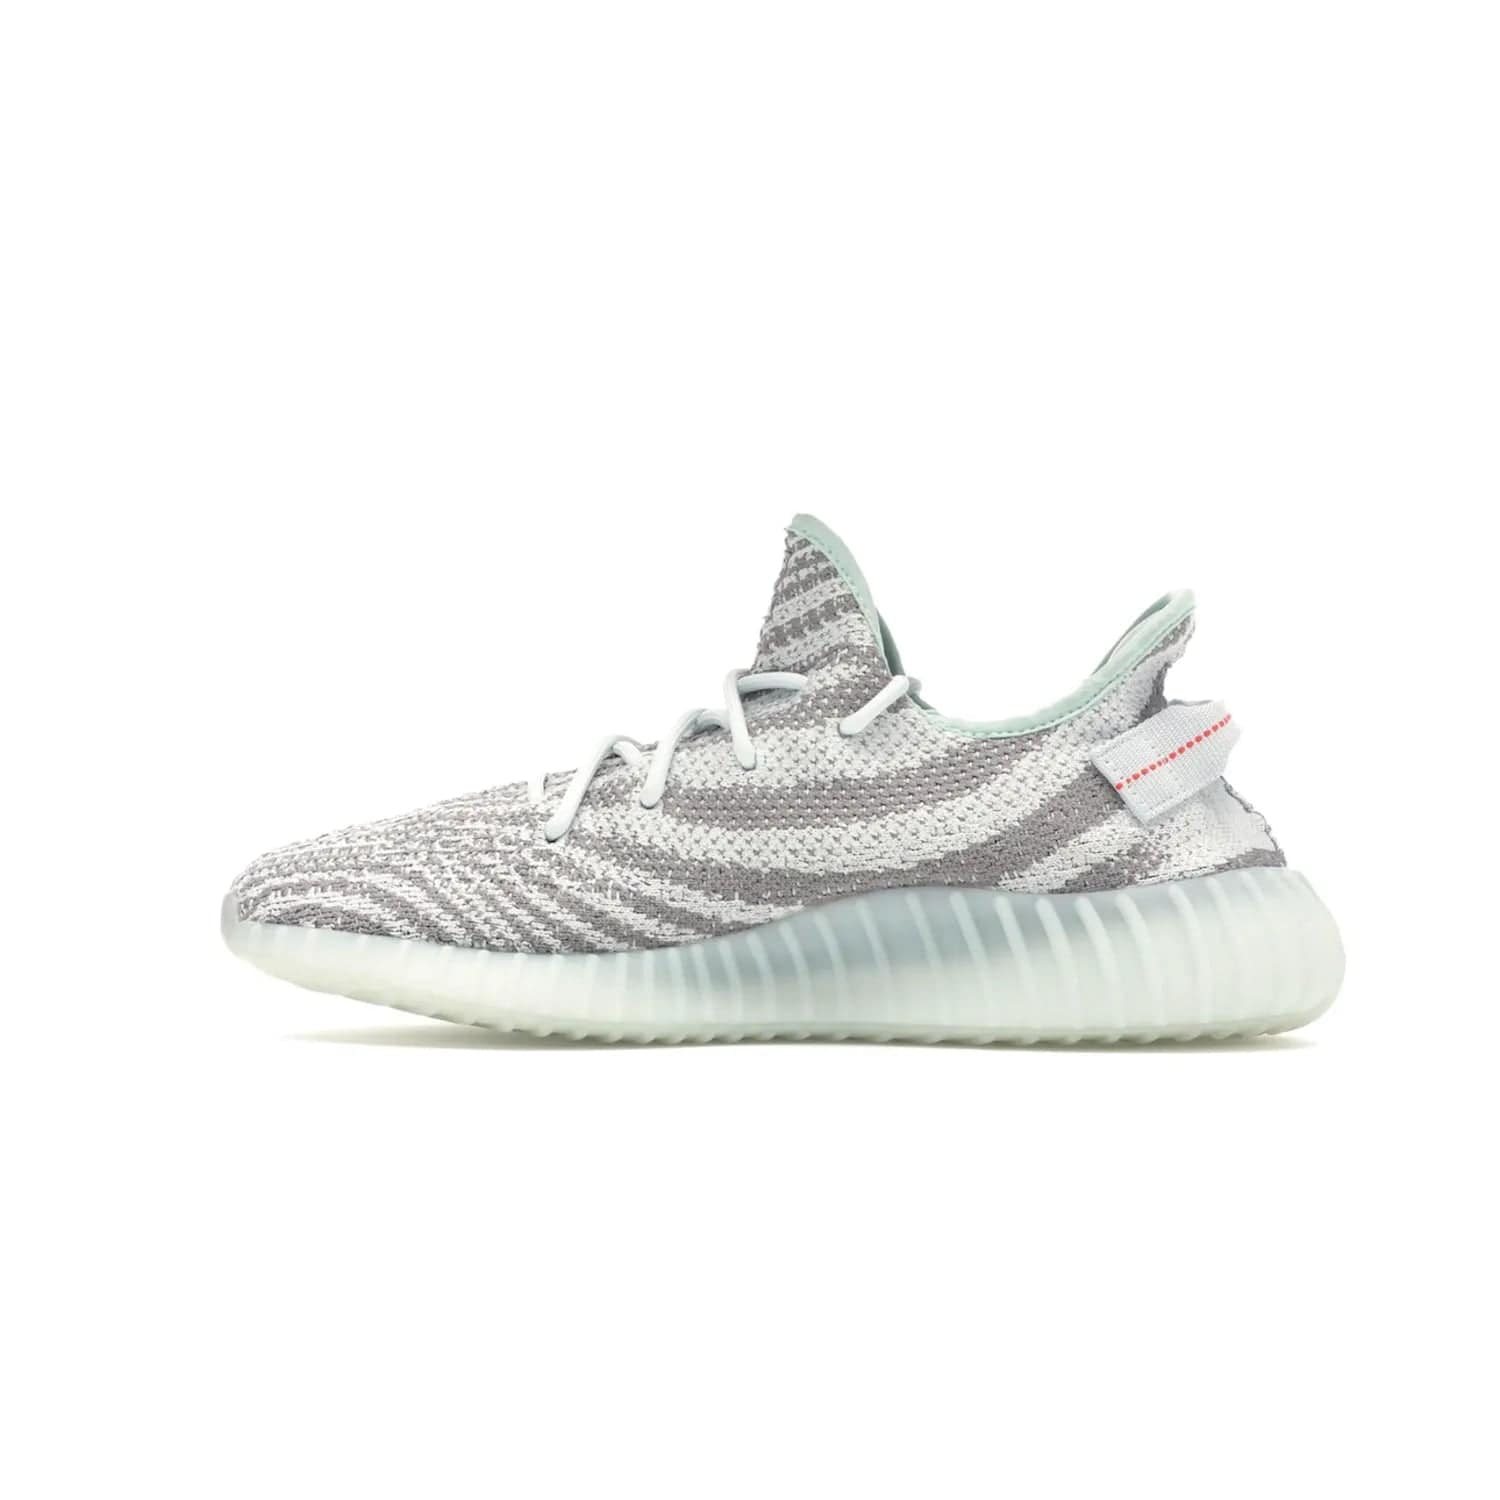 adidas Yeezy Boost 350 V2 Blue Tint - Image 20 - Only at www.BallersClubKickz.com - The adidas Yeezy Boost 350 V2 Blue Tint merges fashion and functionality with its Primeknit upper and Boost sole. Released in December 2017, this luxurious sneaker is perfect for making a stylish statement.